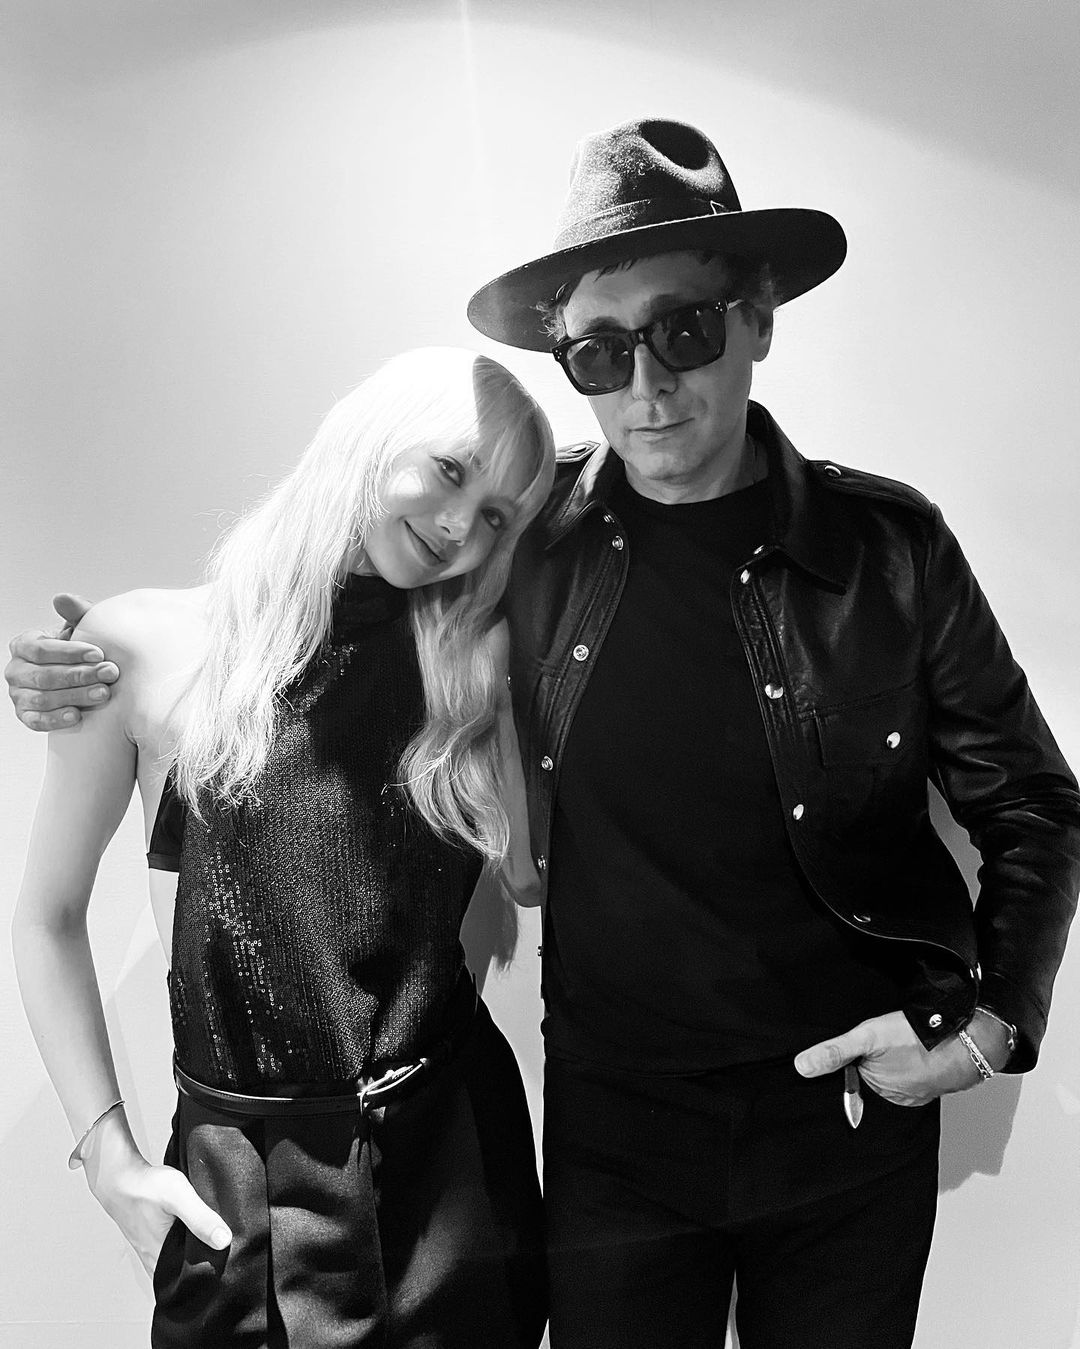 Congratulations on the show Hedi! Thank you for having me…